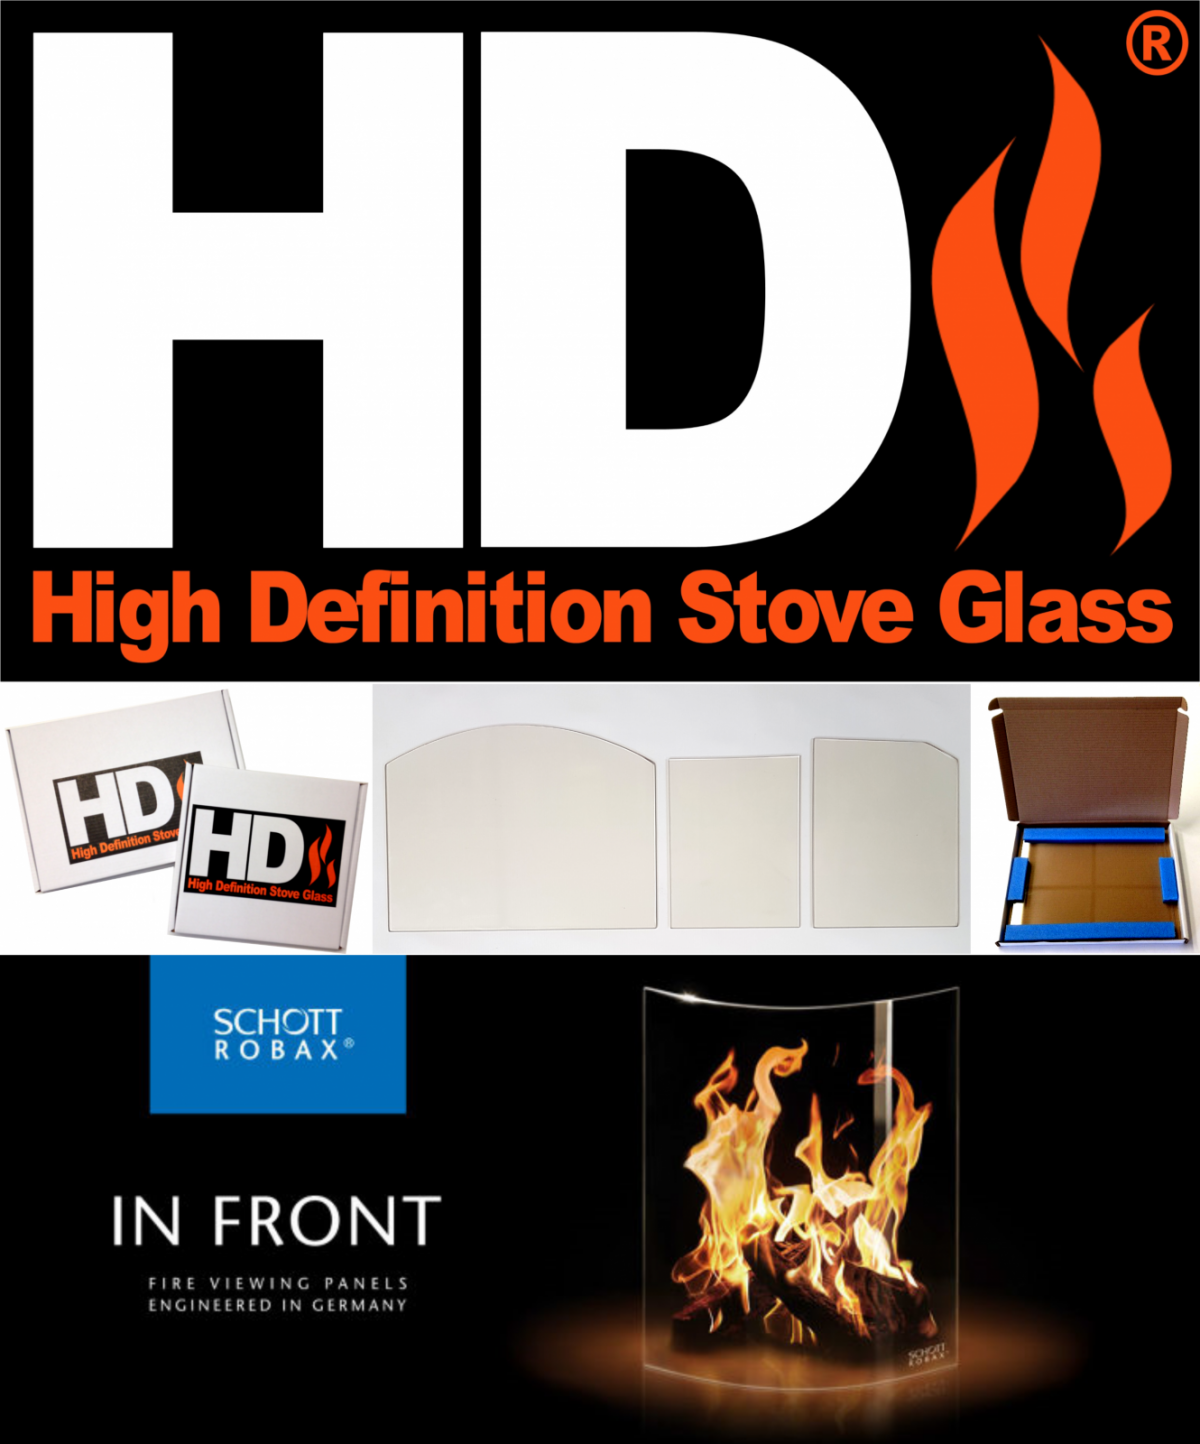 High Definition Stove Glass for the Agatar Hercules